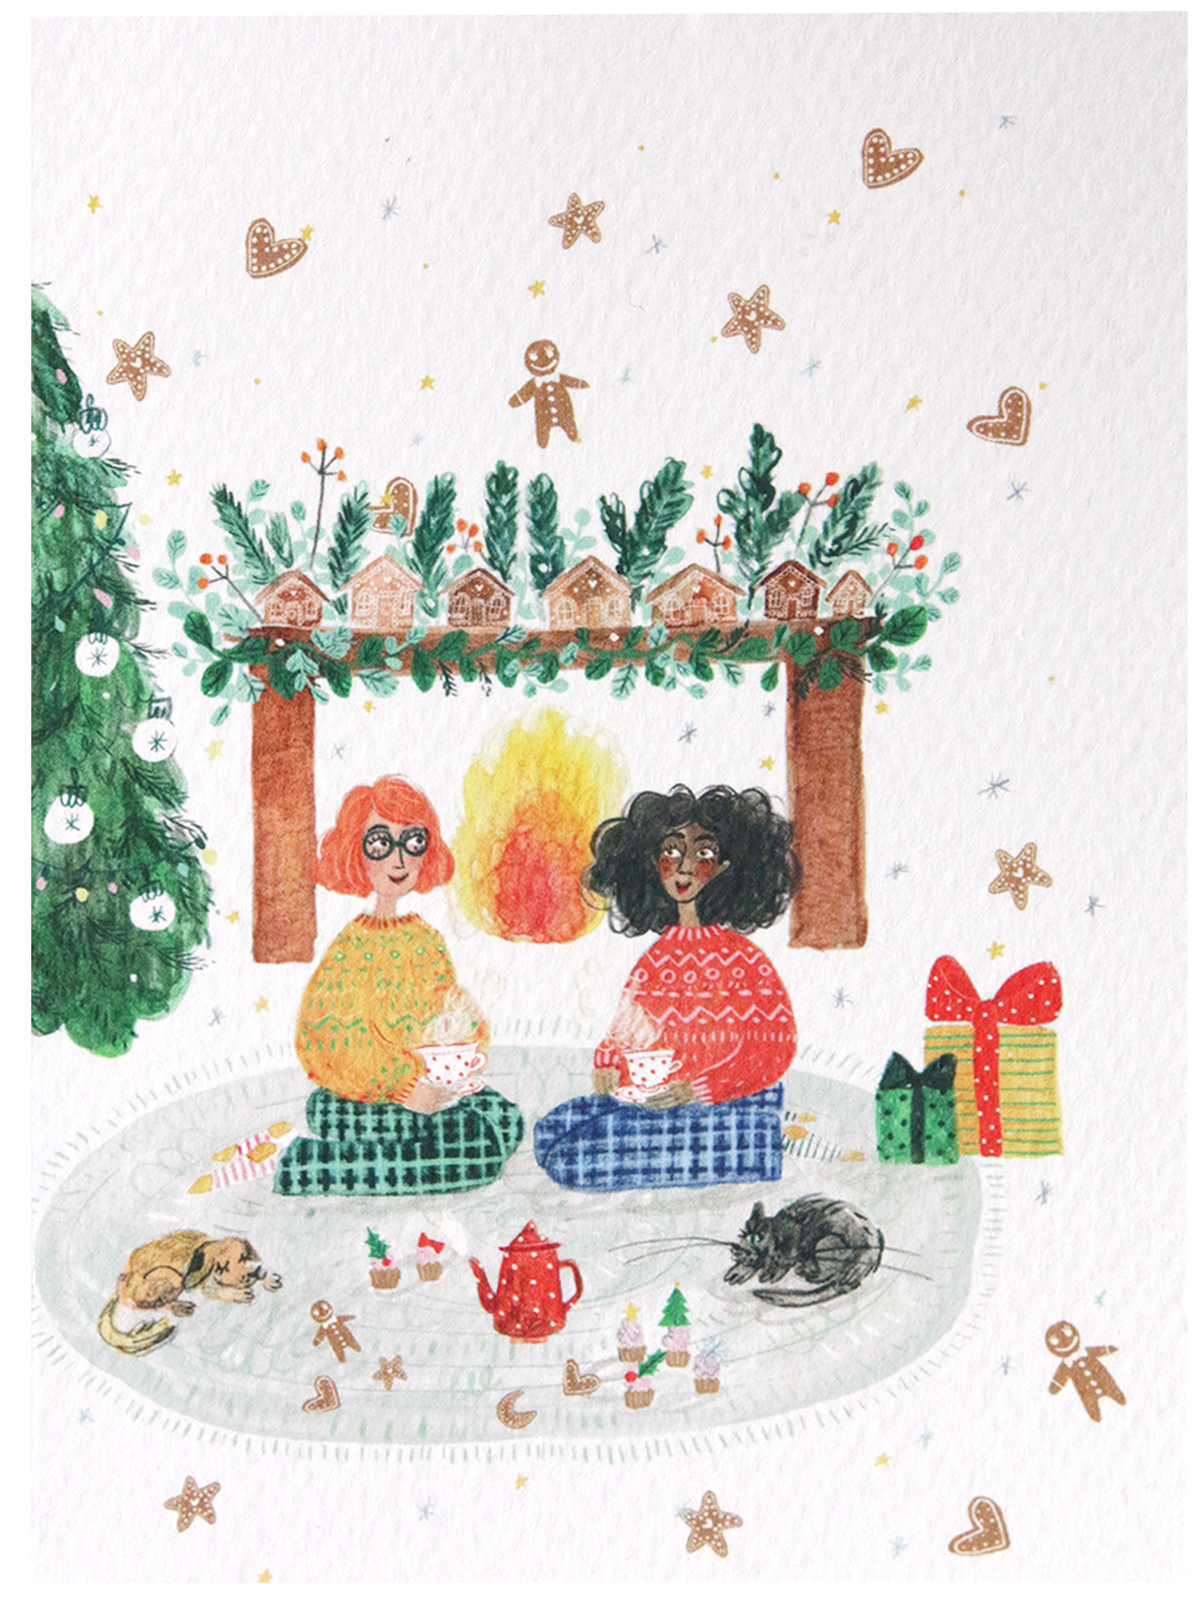 Girls by Fireplace Illustrated Christmas Card 